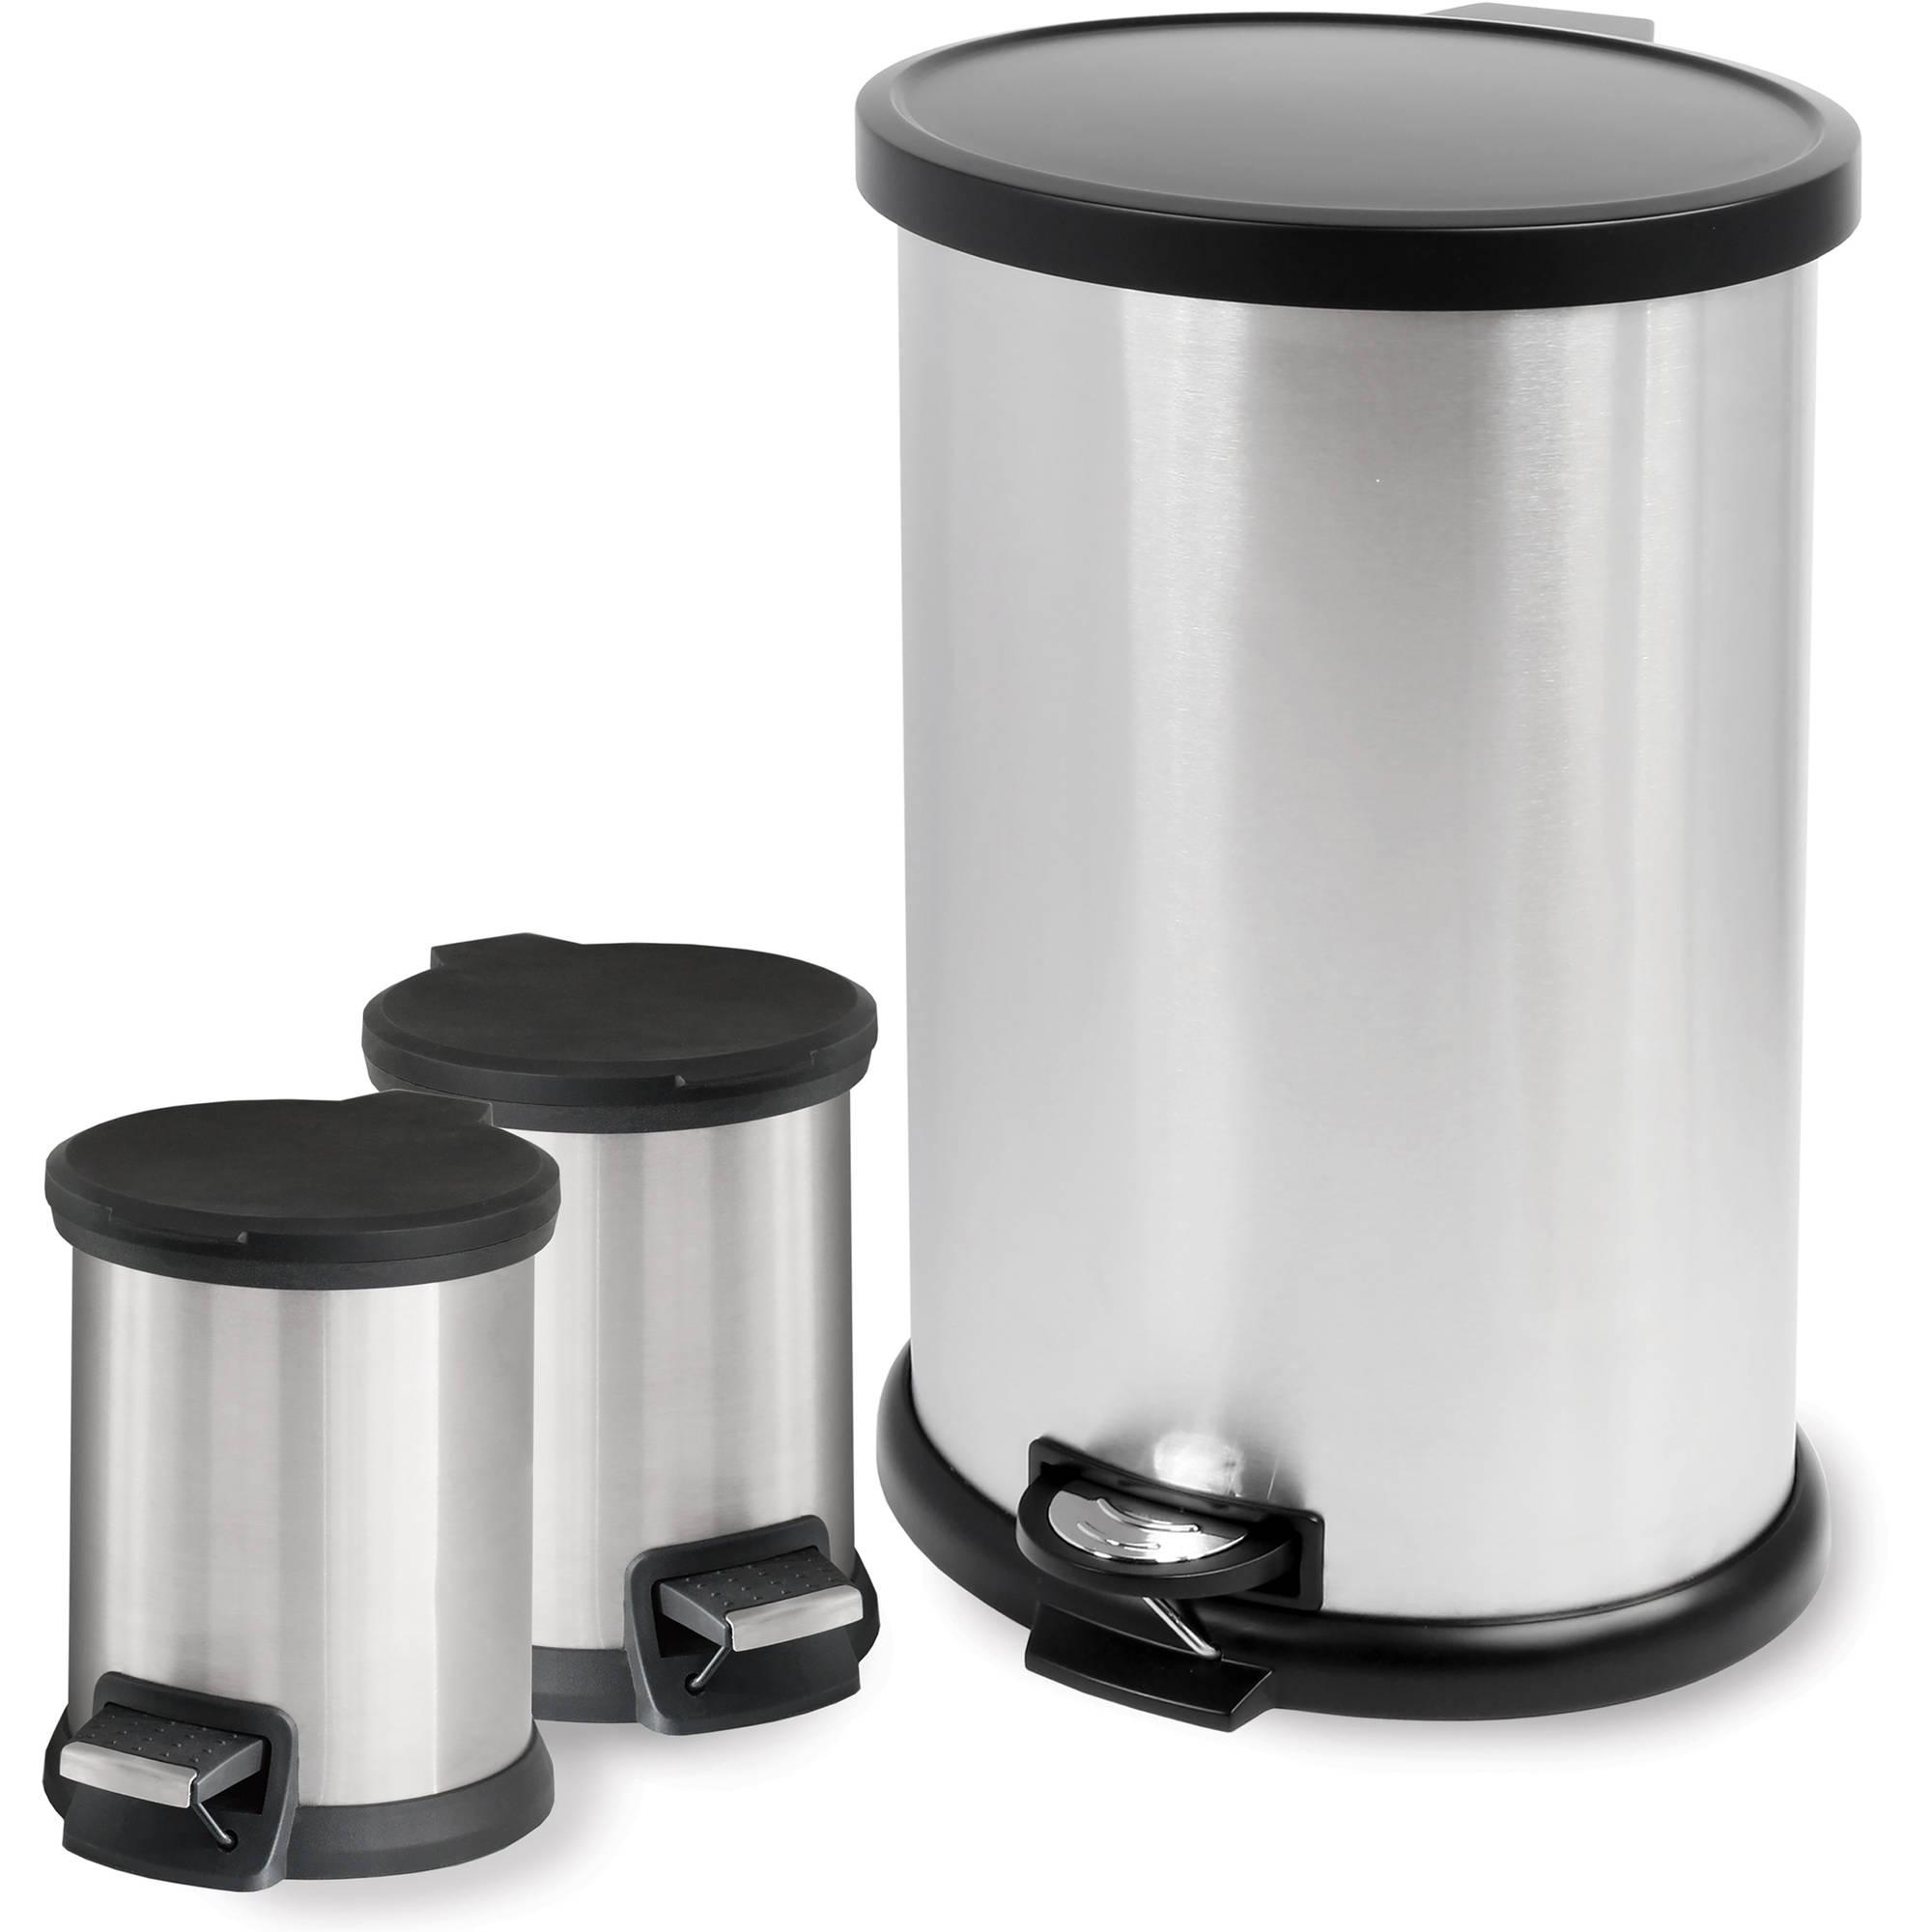 Mainstays 3-Piece Stainless Steel 1.3 Gal and 8 Gal Waste Can Combo - Walmart.com 垃圾桶套装